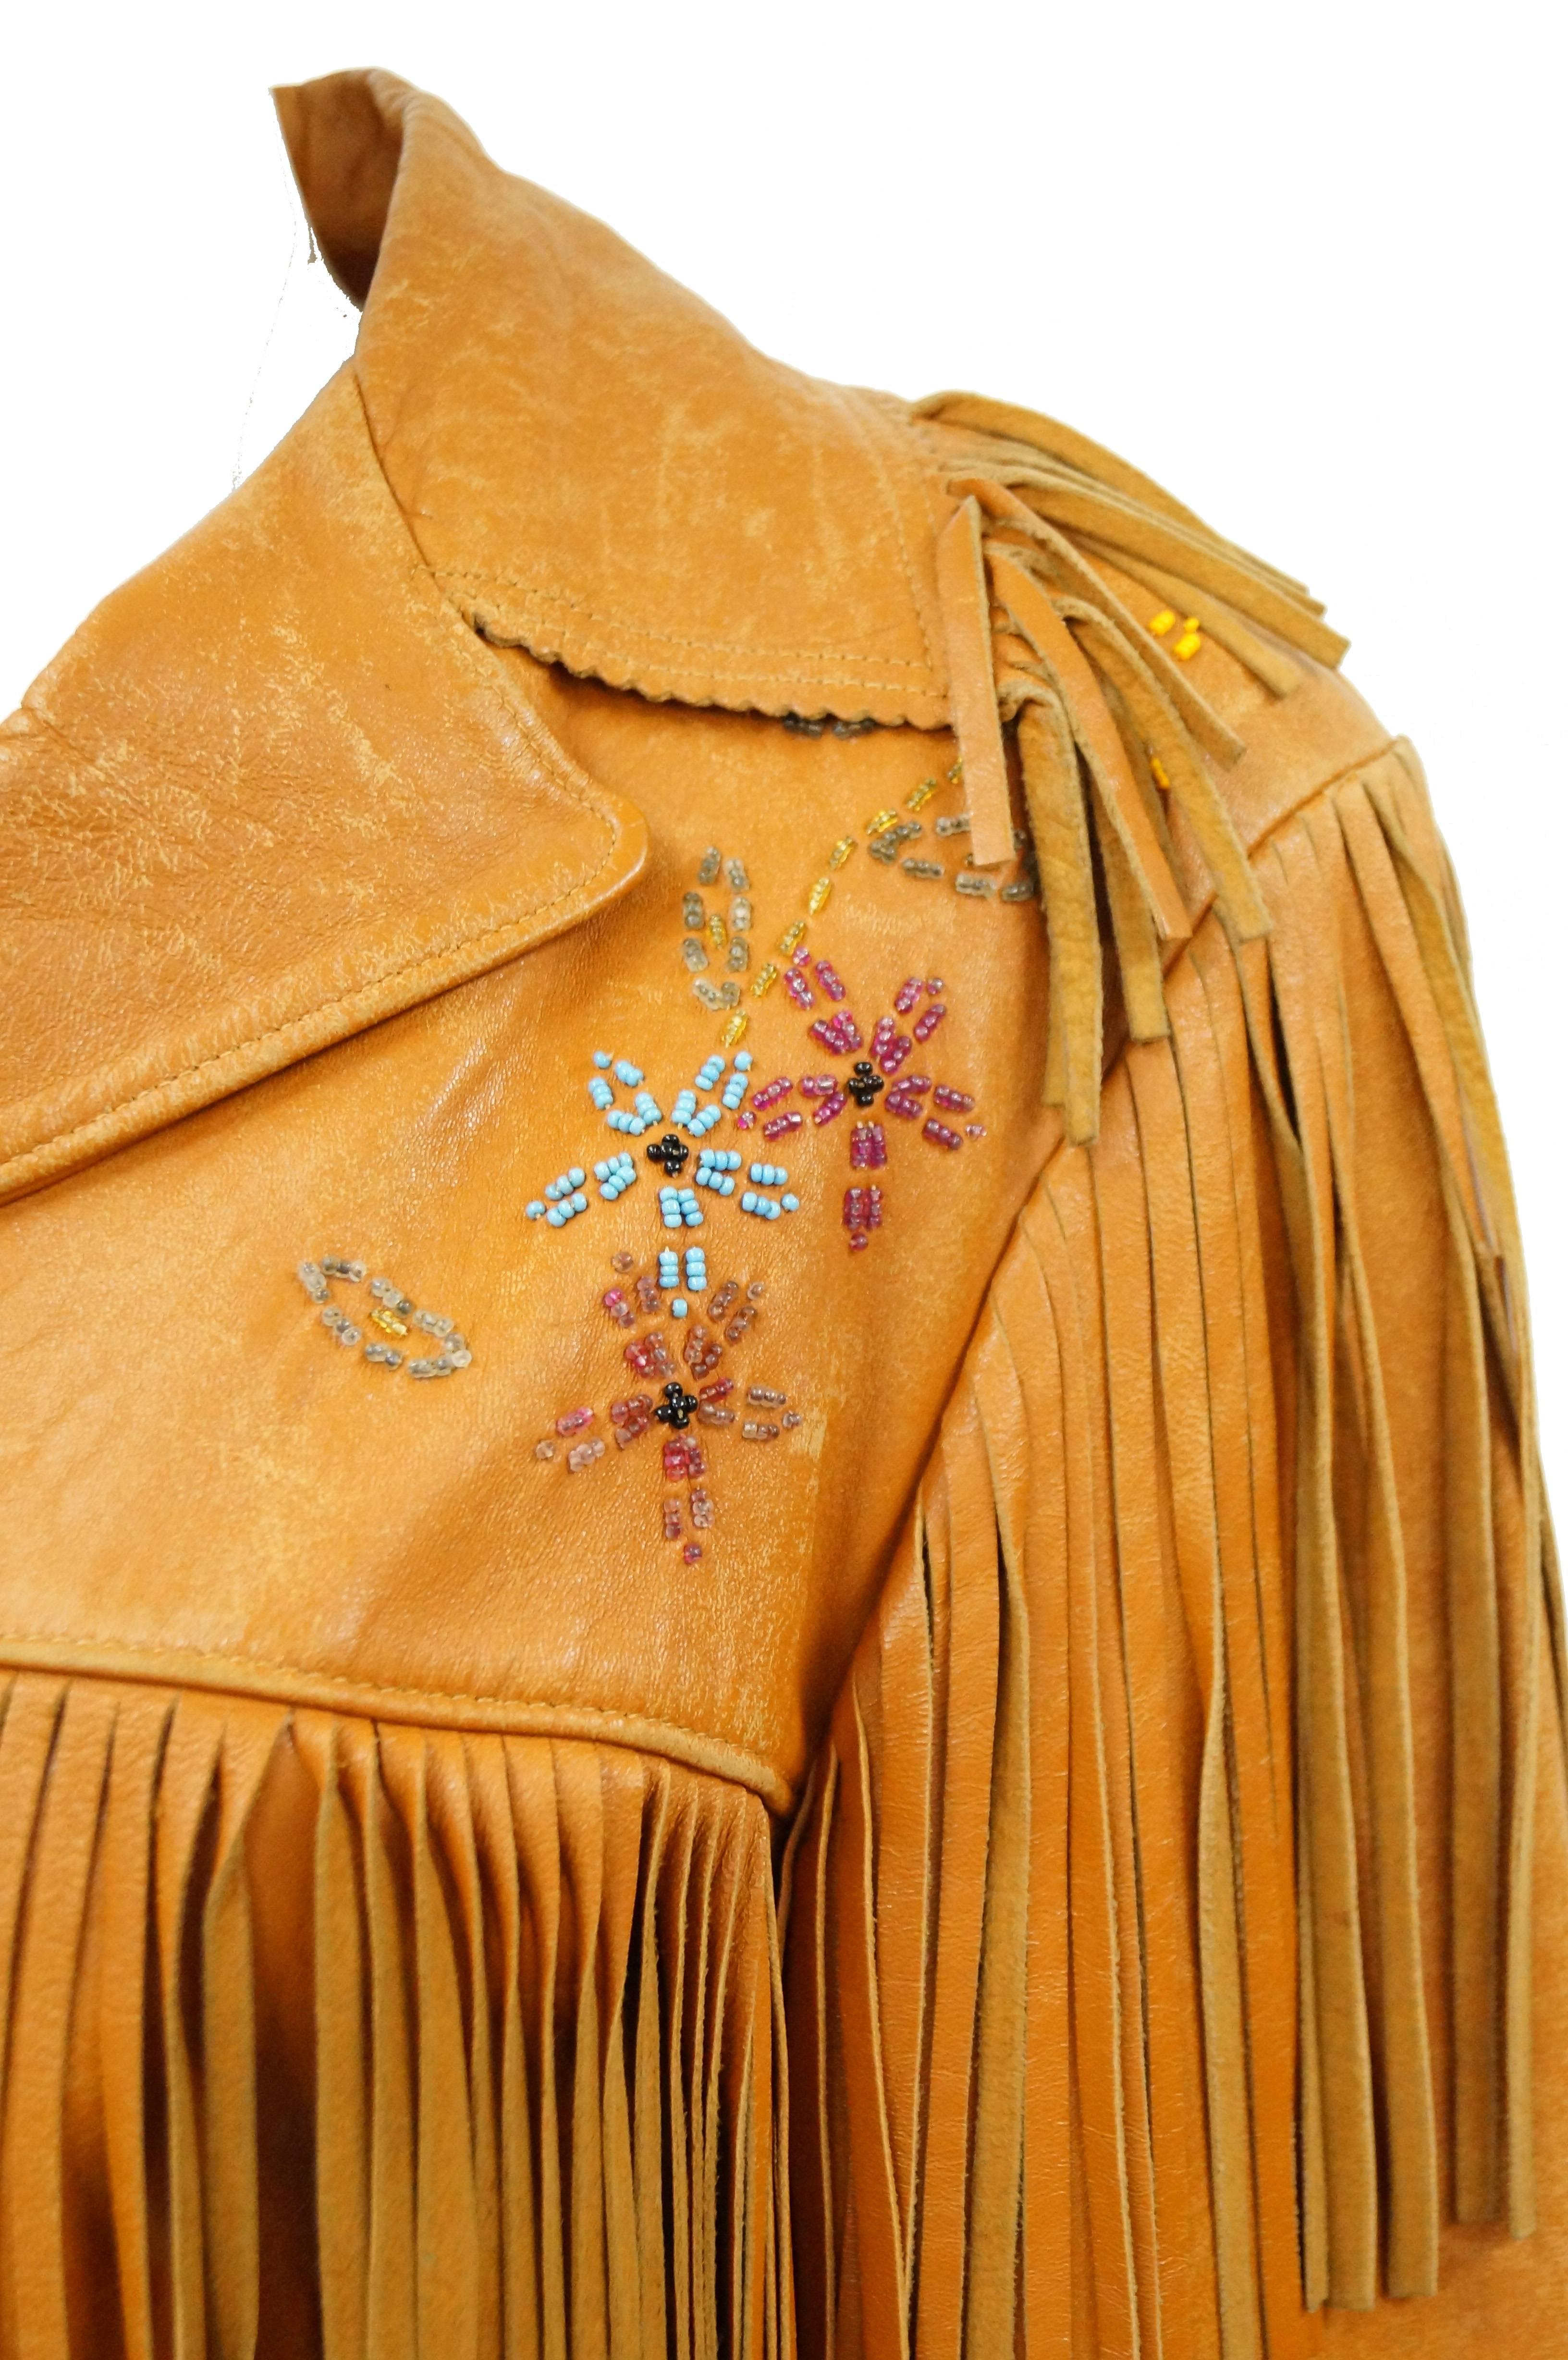 Fabulous authentic 1960s leather jacket! Jacket has pointed collar, long sleeves, hits at the waist. Bust, hem, sleeves, and shoulder feature long fringe. Free spirited boho floral and bird beading on the front and back. Satin lining. Chris Line